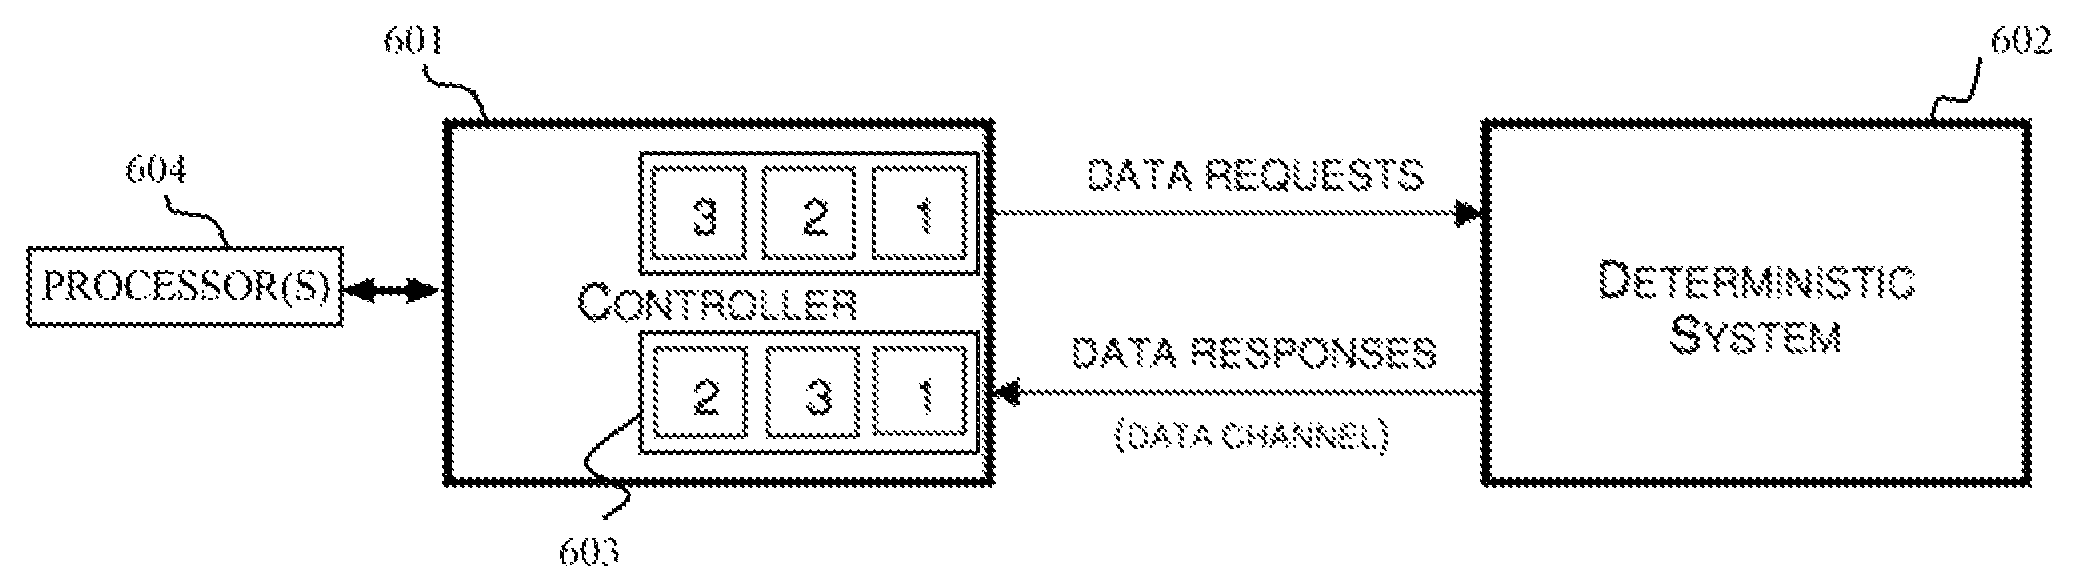 Reordering data responses using ordered indicia in a linked list